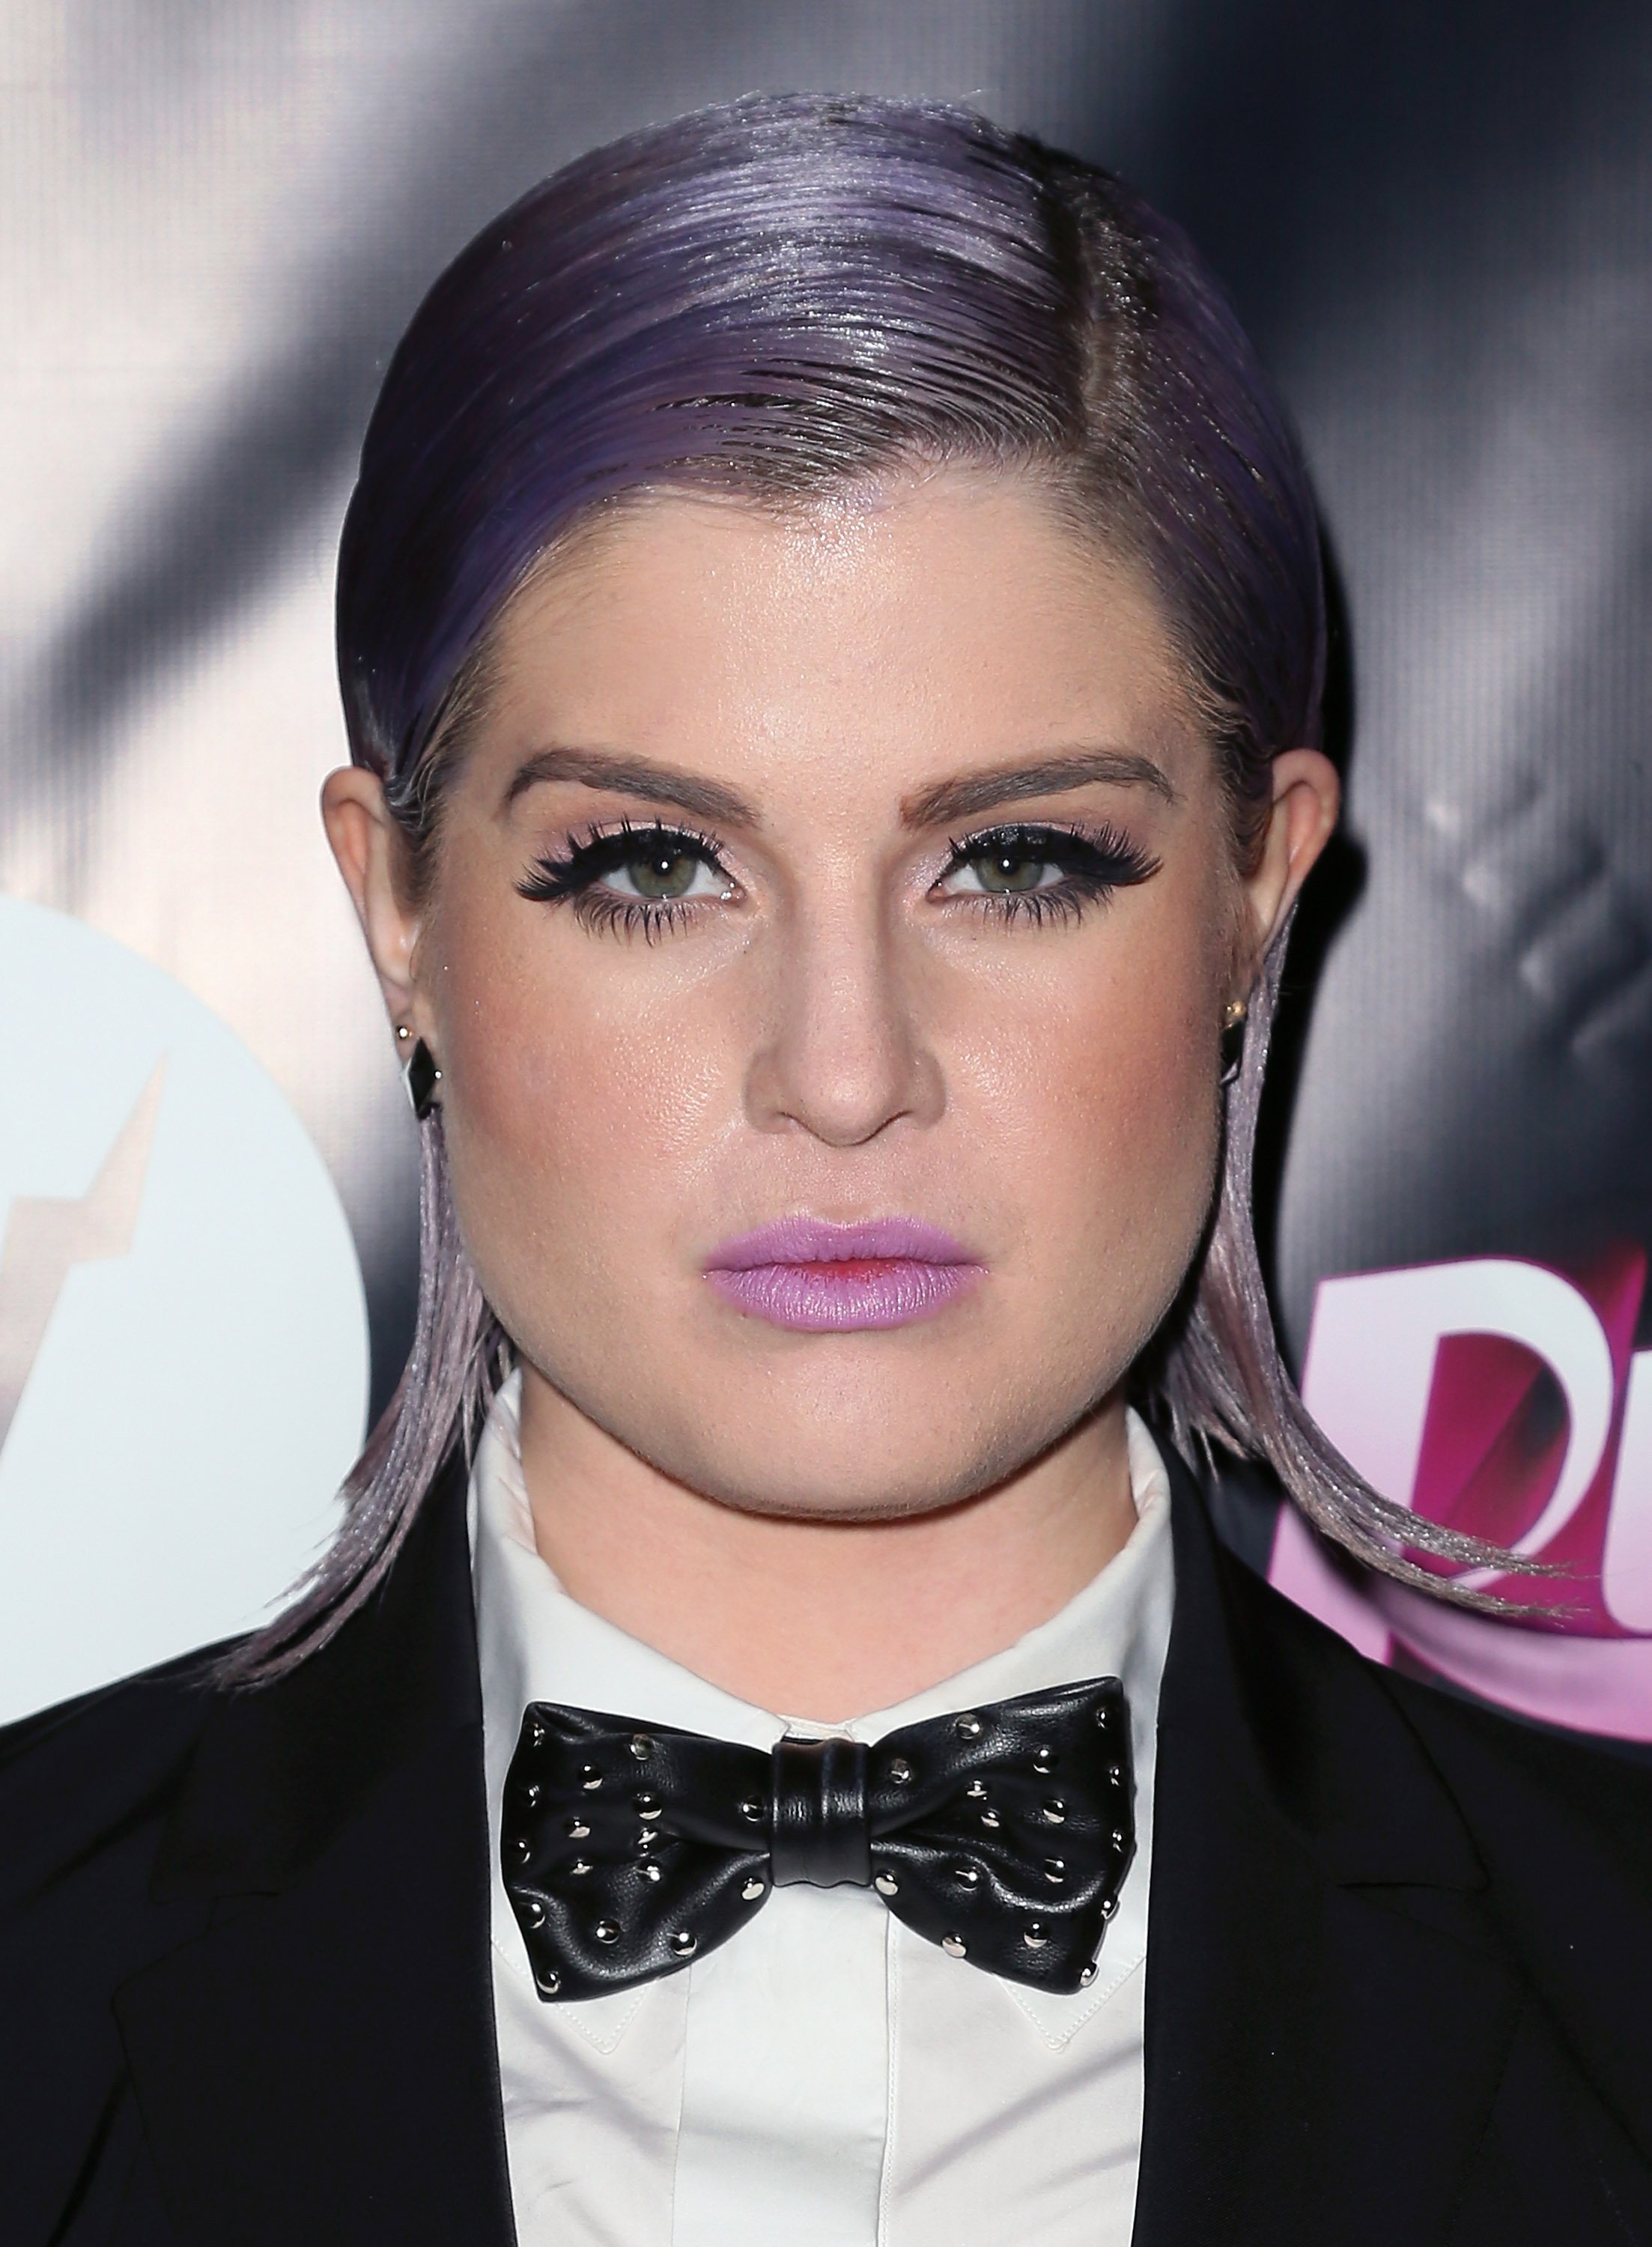 Kelly Osbourne attends the "RuPaul's Drag Race" Season 6 premiere party at The Roosevelt Hotel on February 17, 2014 in Hollywood, California | Photo: Getty Images